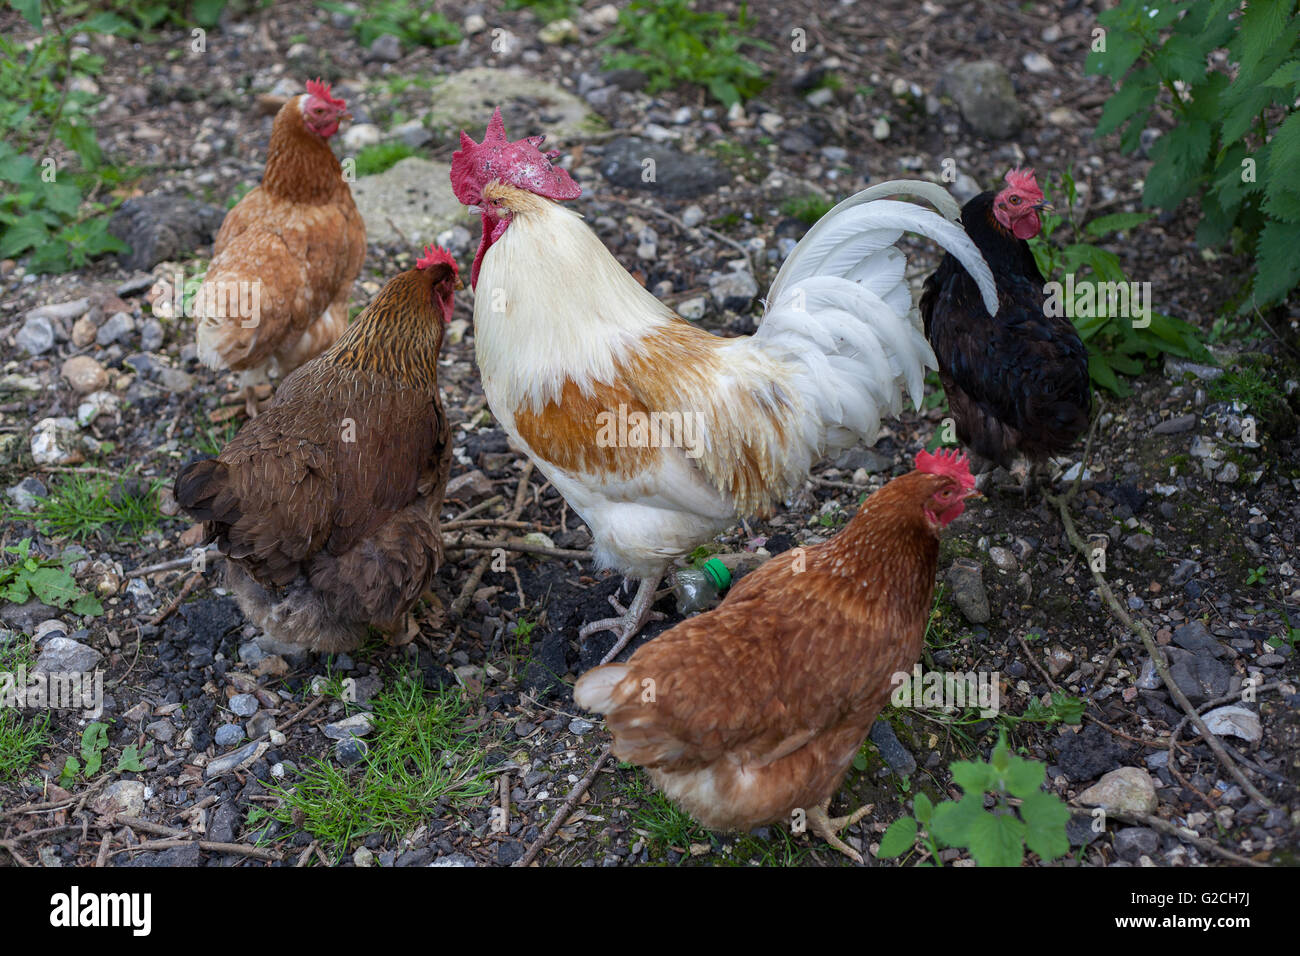 Rooster and hens. Stock Photo